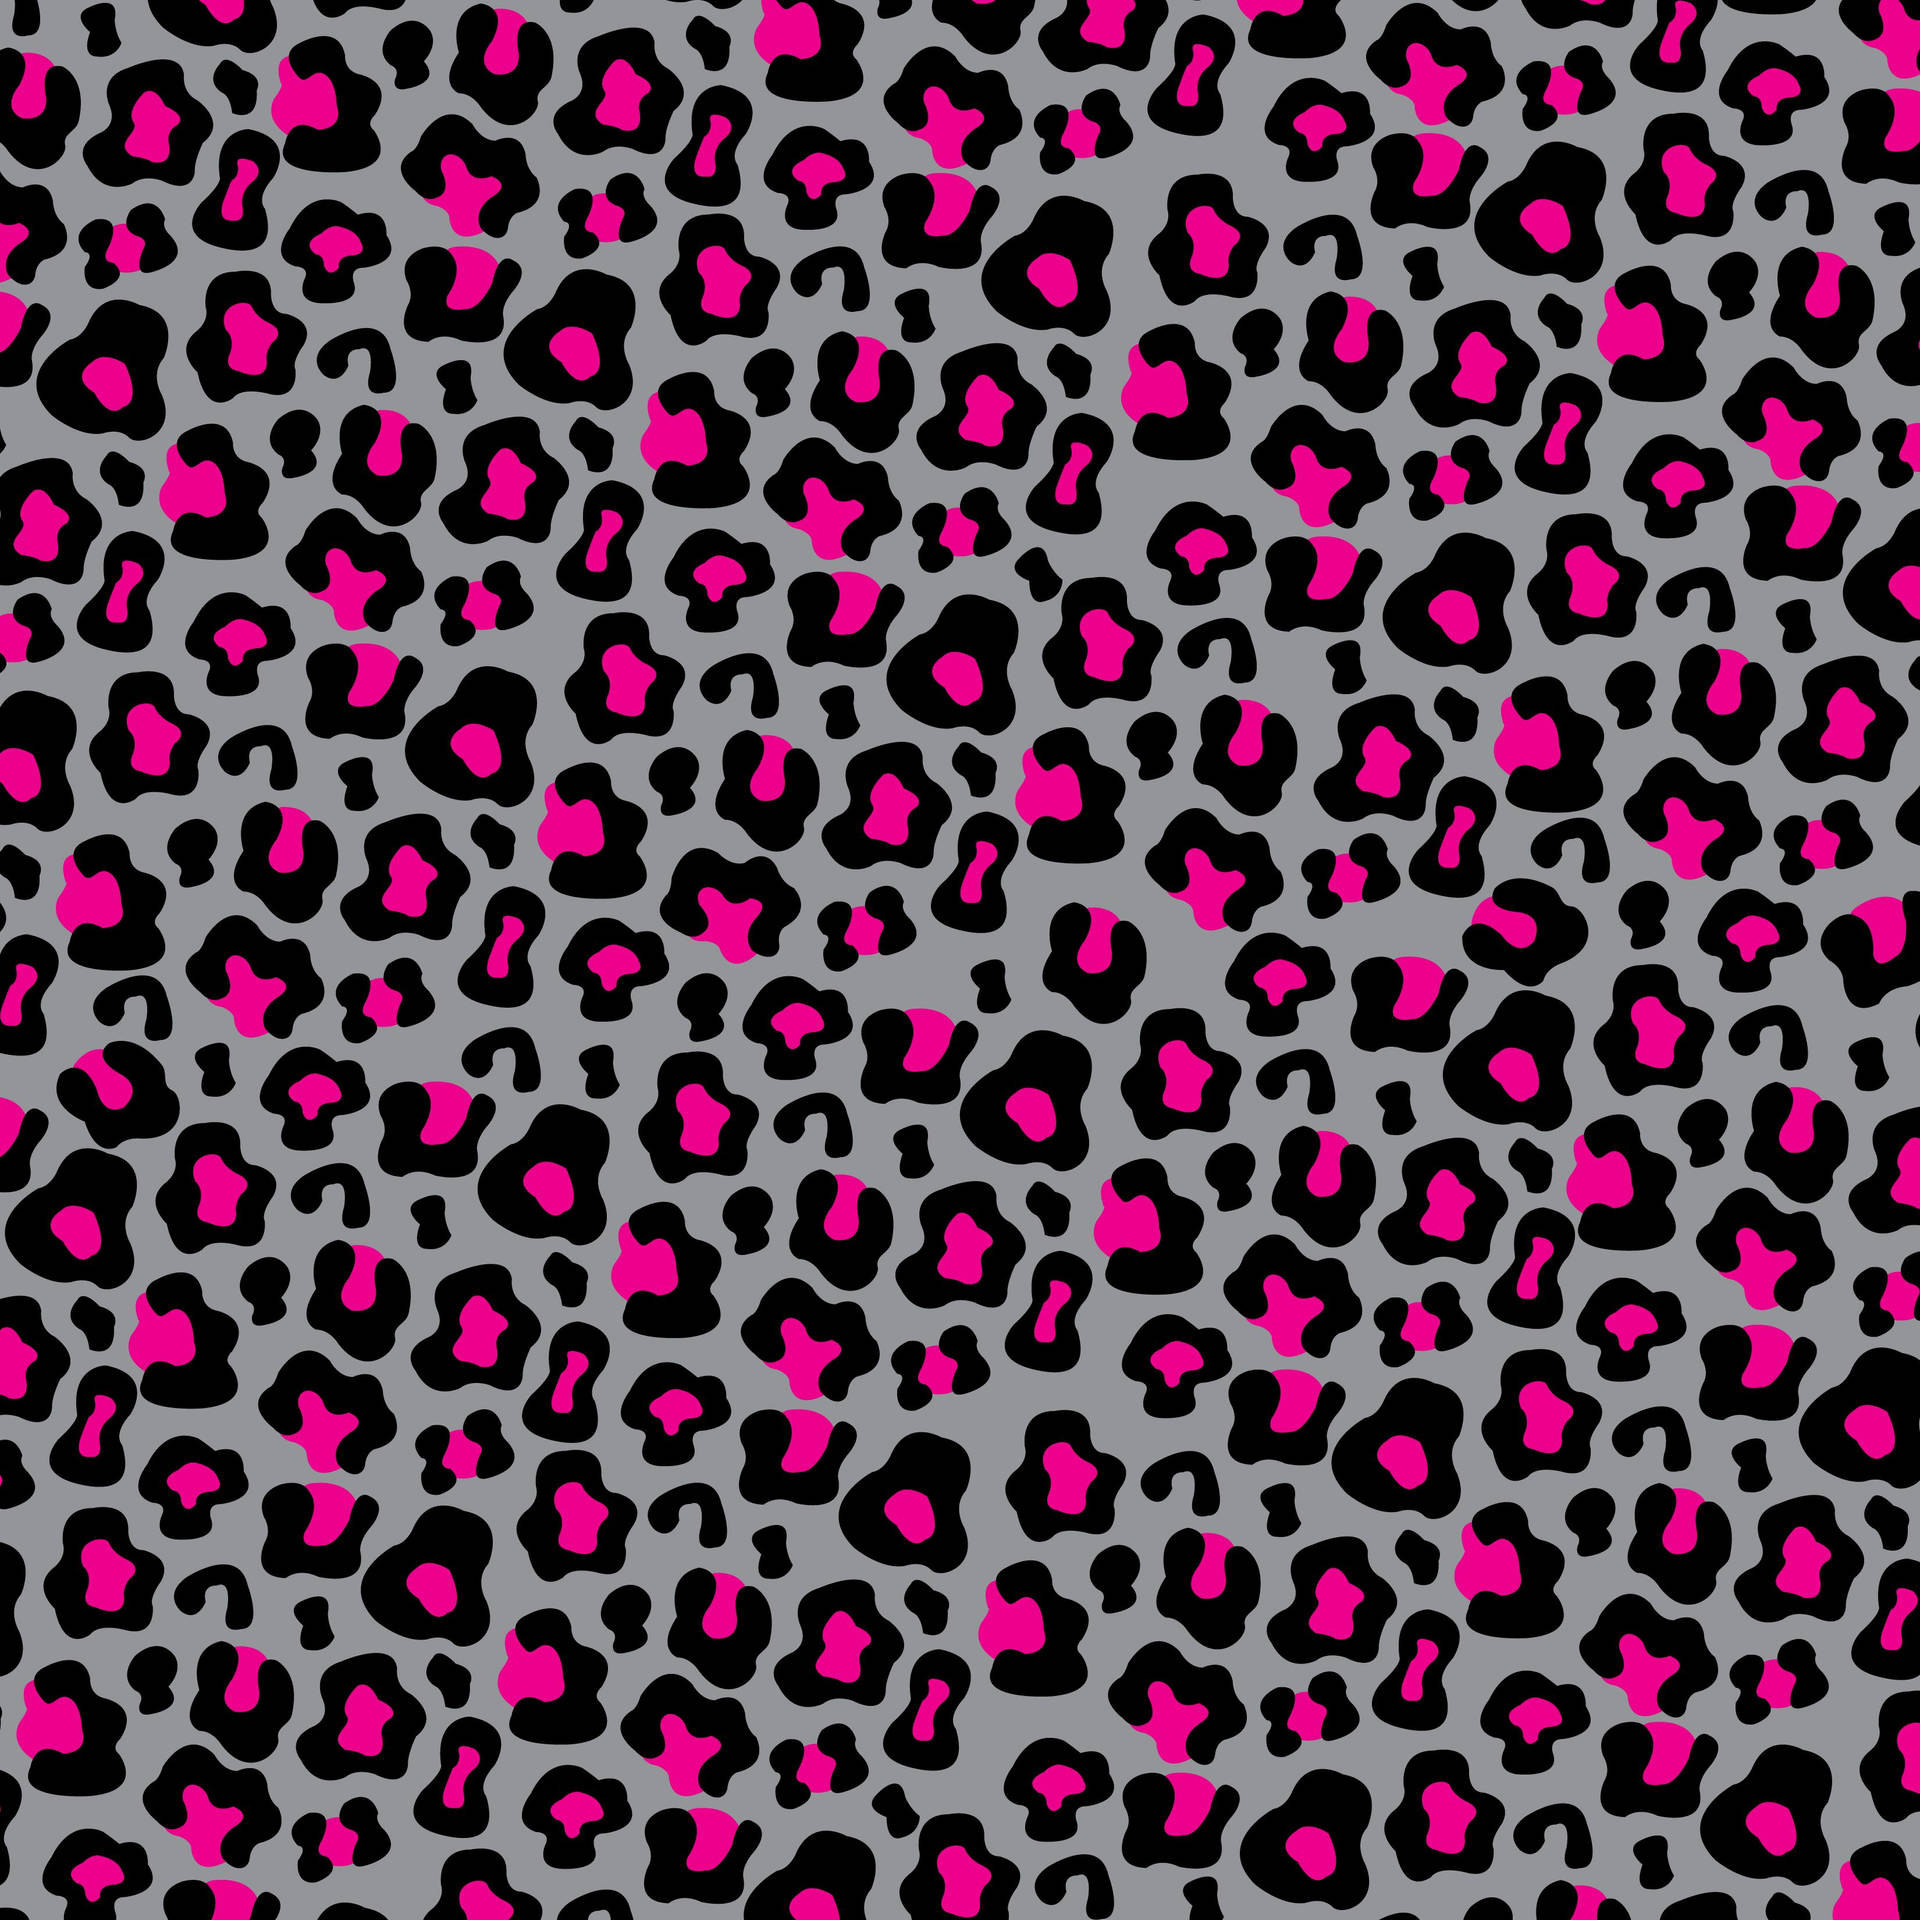 Leopard Print 3300X3300 Wallpaper and Background Image